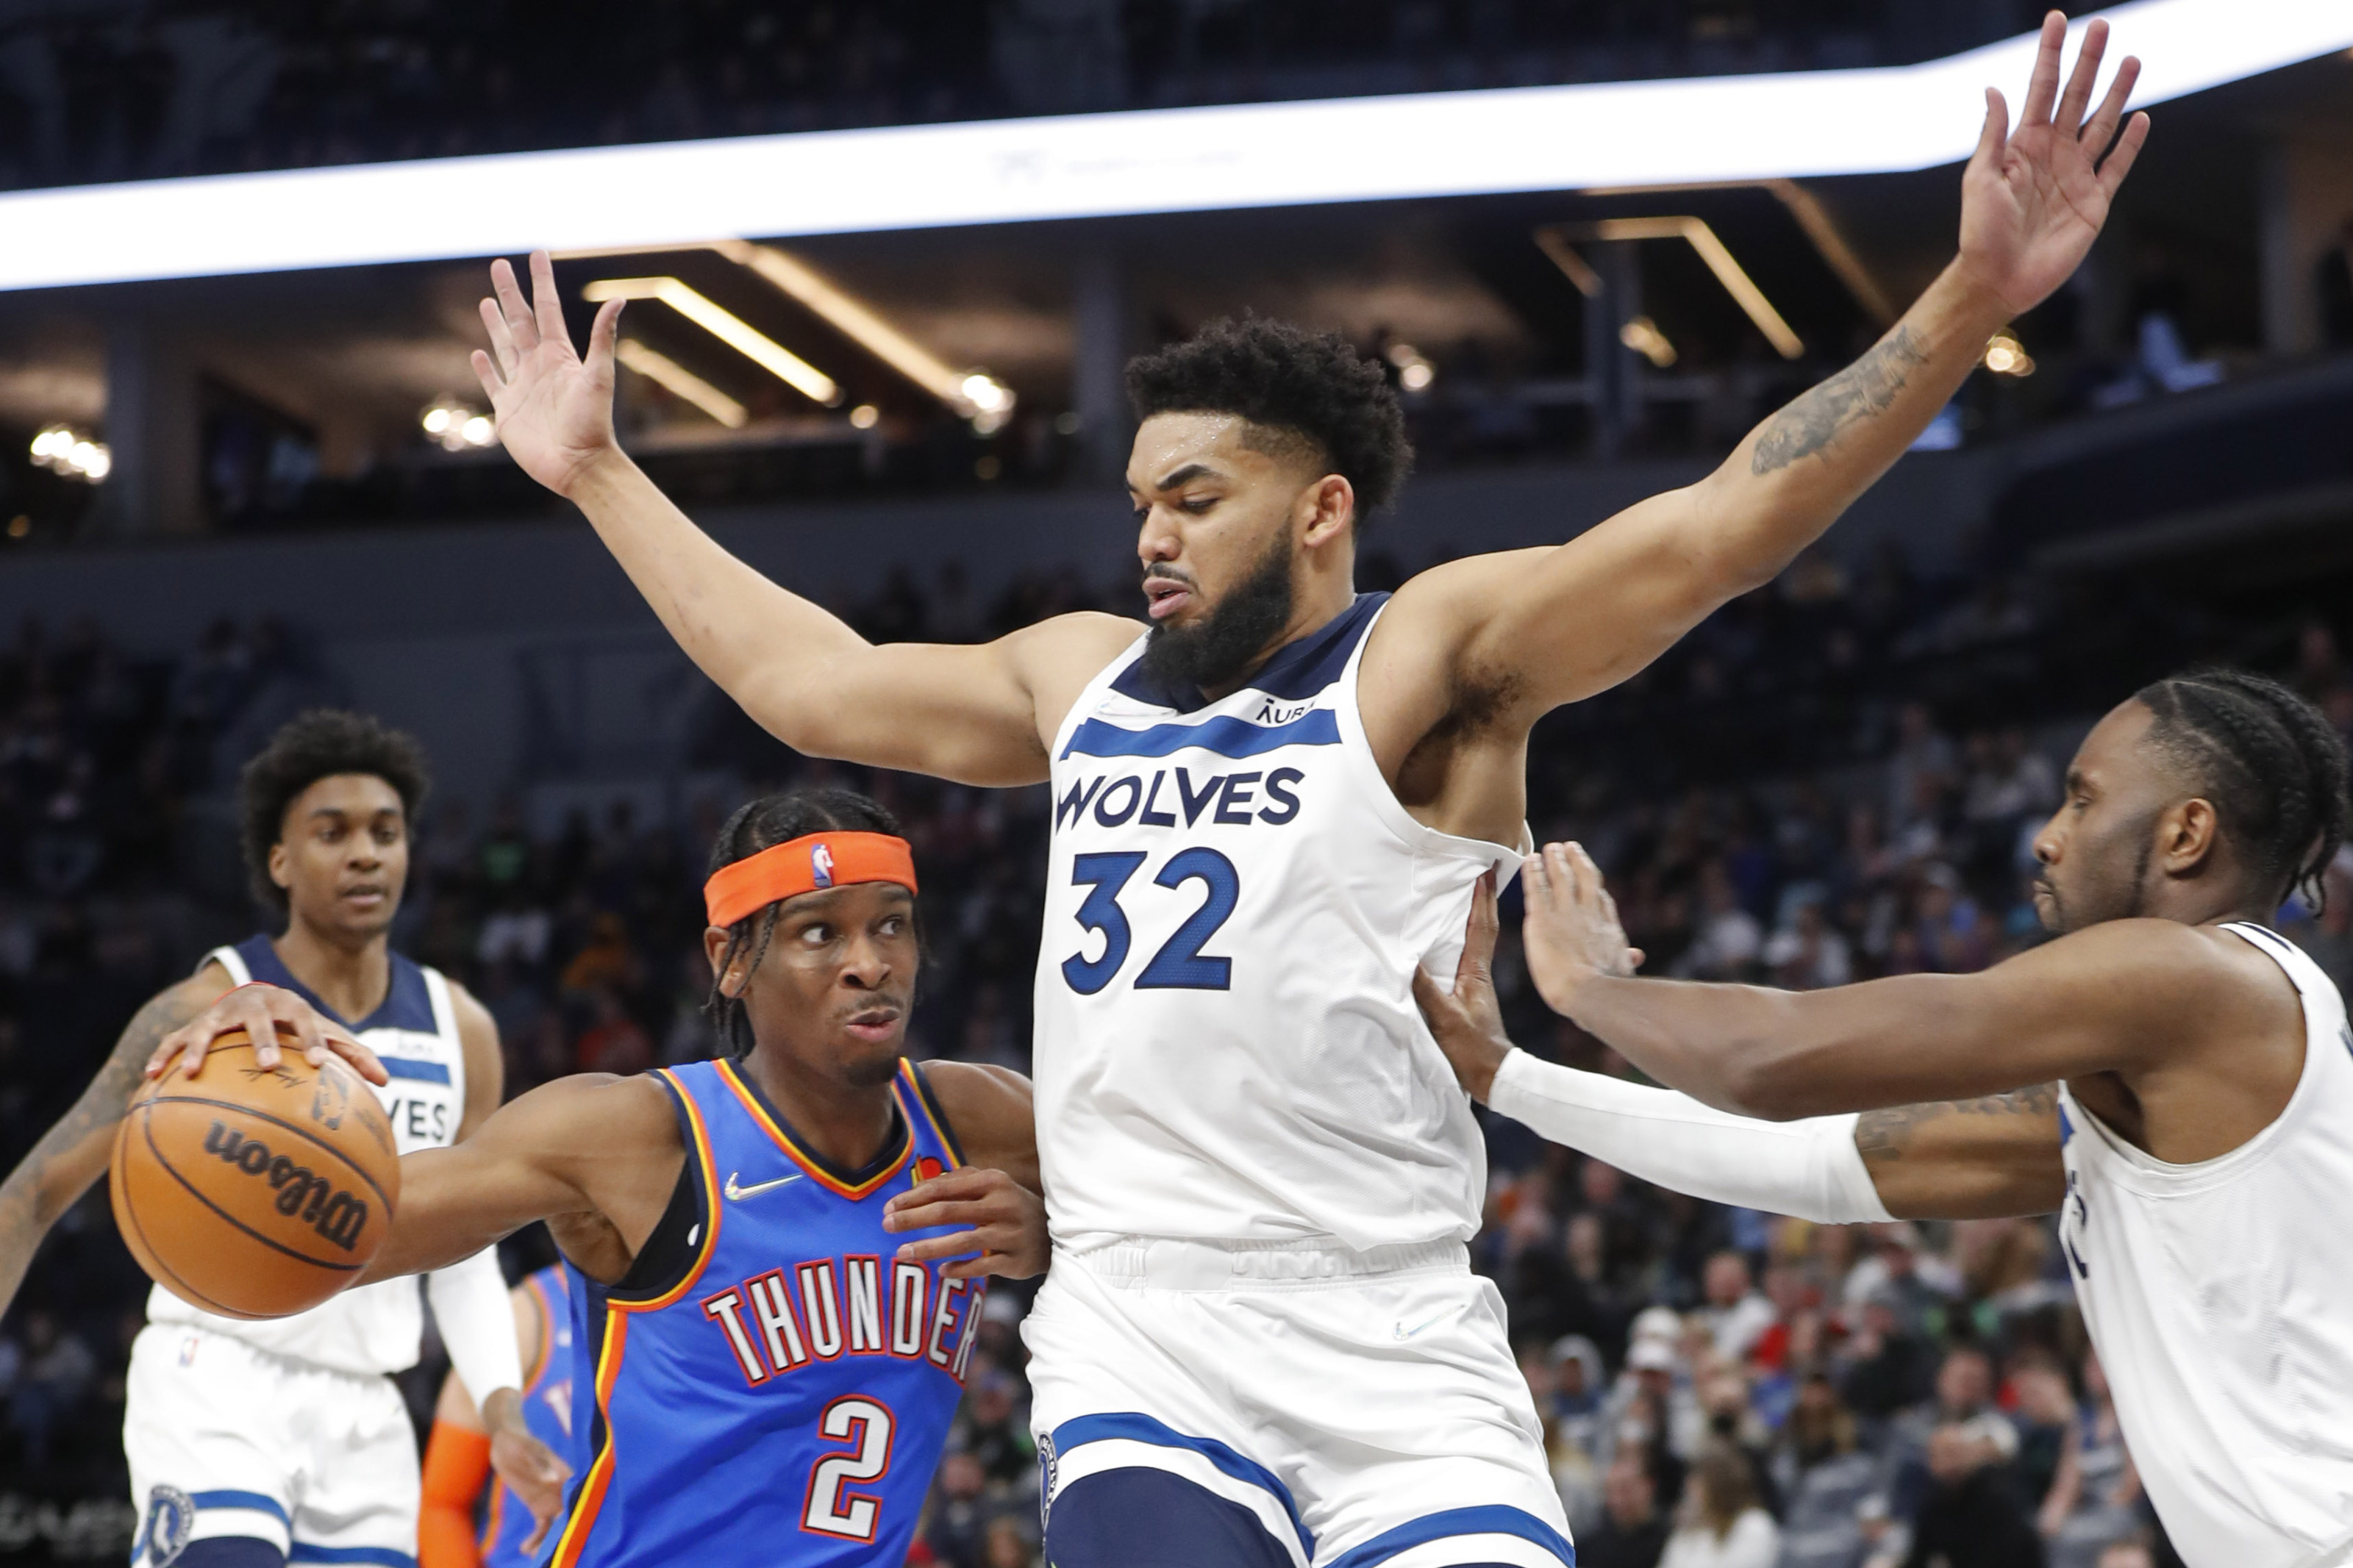 Thunder vs Timberwolves Game day info, betting spread, how to watch